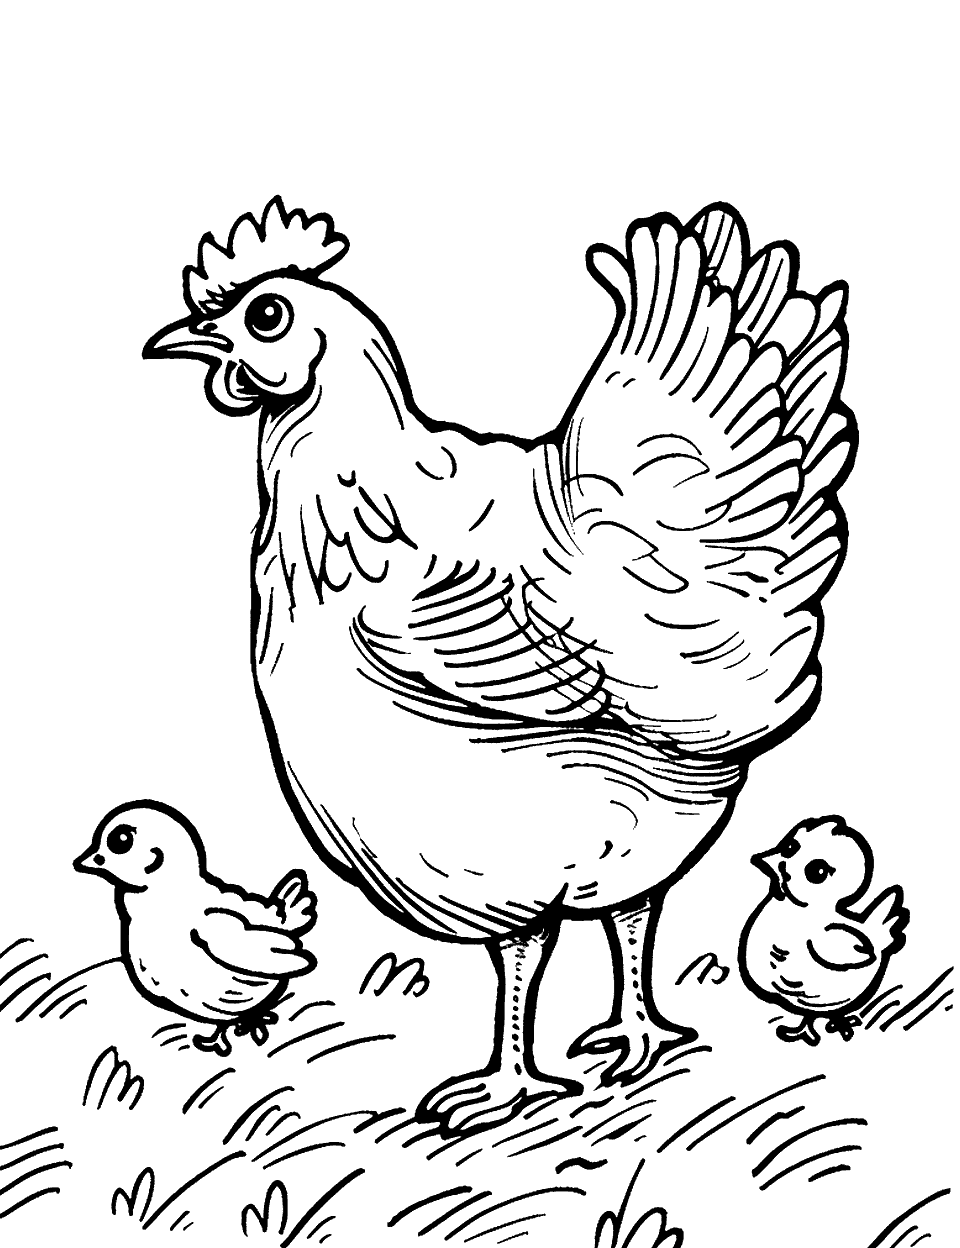 Chicken Family on a Walk Coloring Page - A mother hen leading her chicks on a walk through a simple, grassy field.